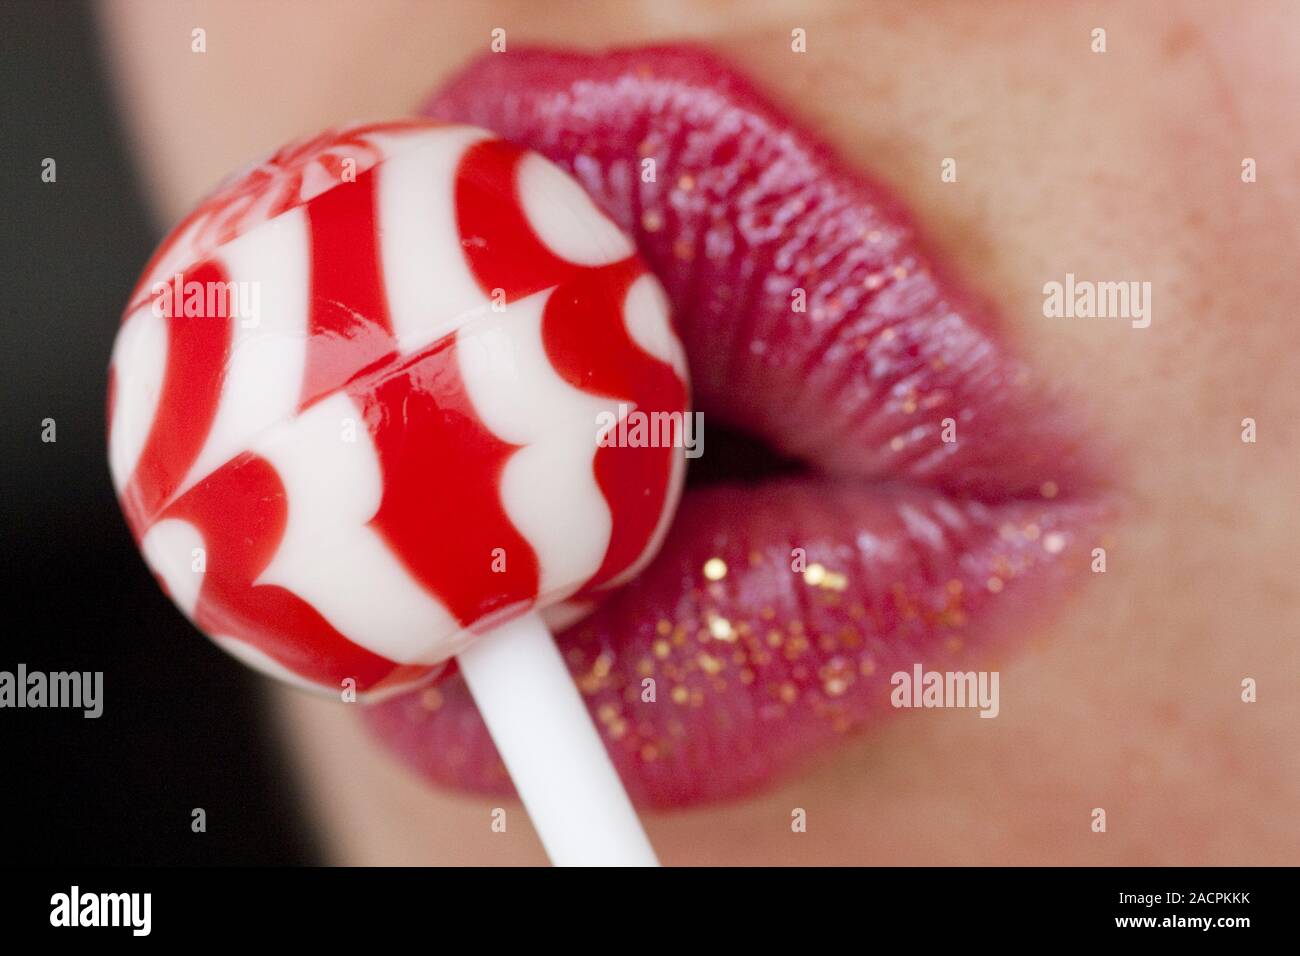 red lips with lollipop Stock Photo